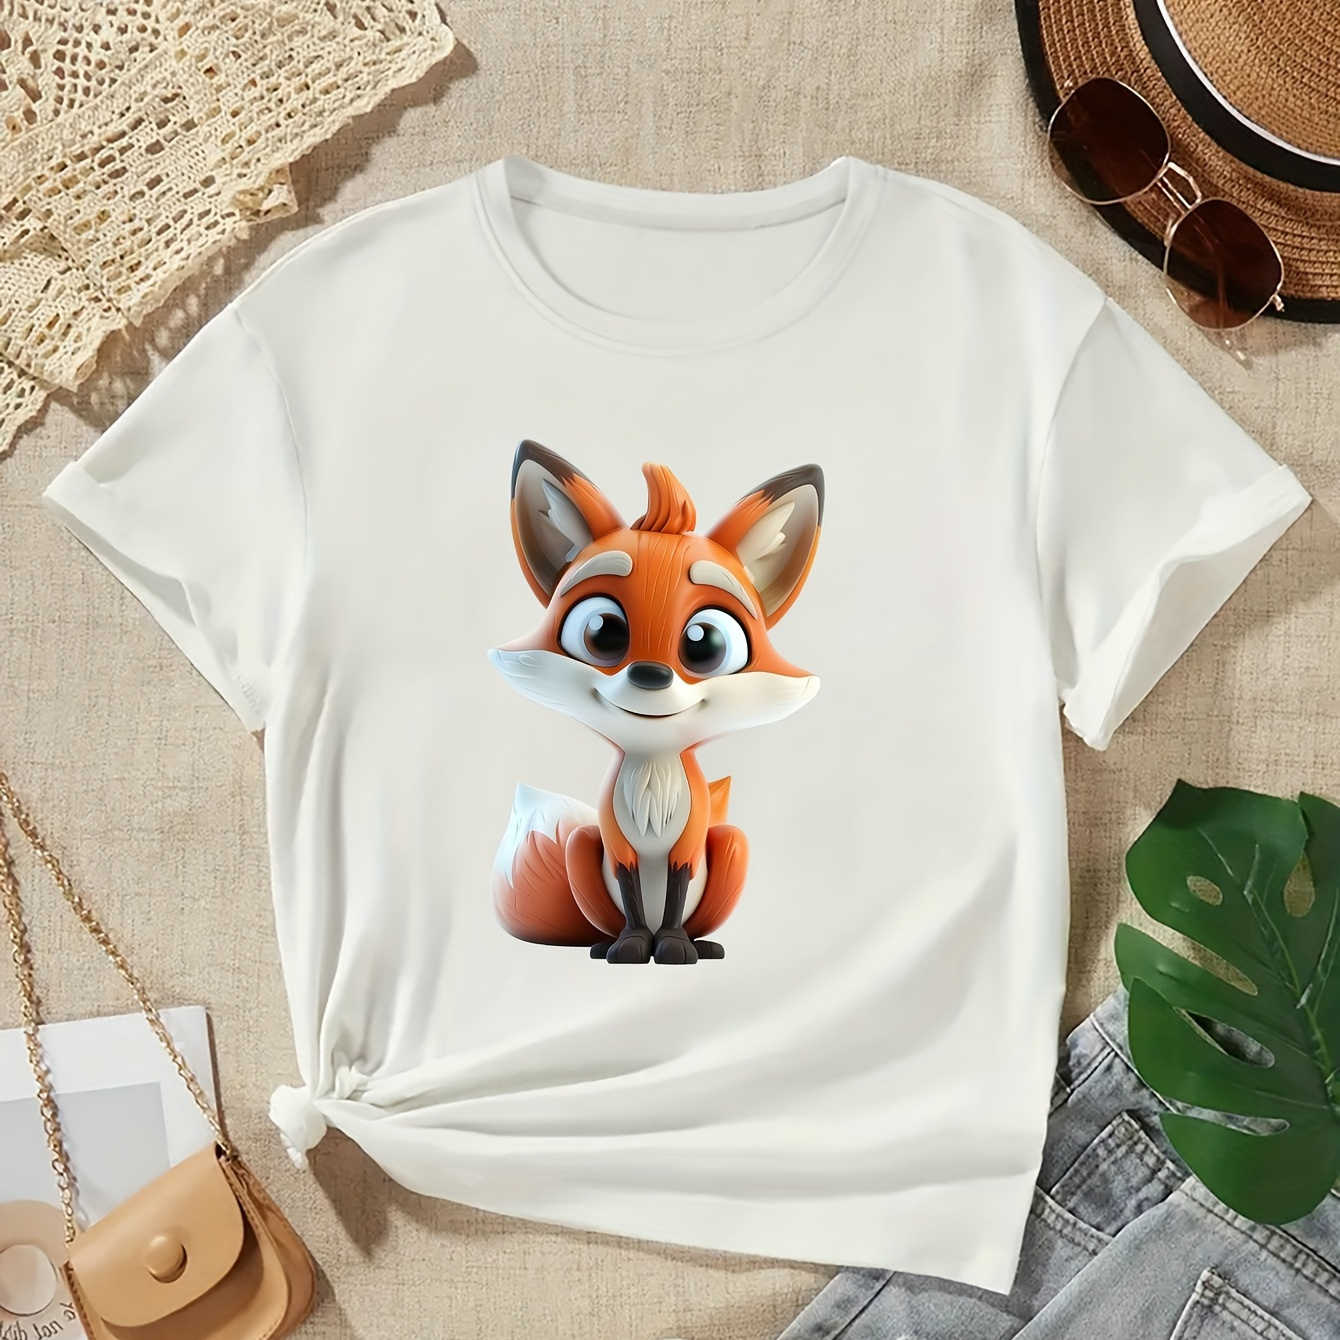 

Girls Summer Casual Fashion Cartoon Fox Printed T-shirt Top, Short Sleeves, Round Neck, Comfort Fit - Youthful Style